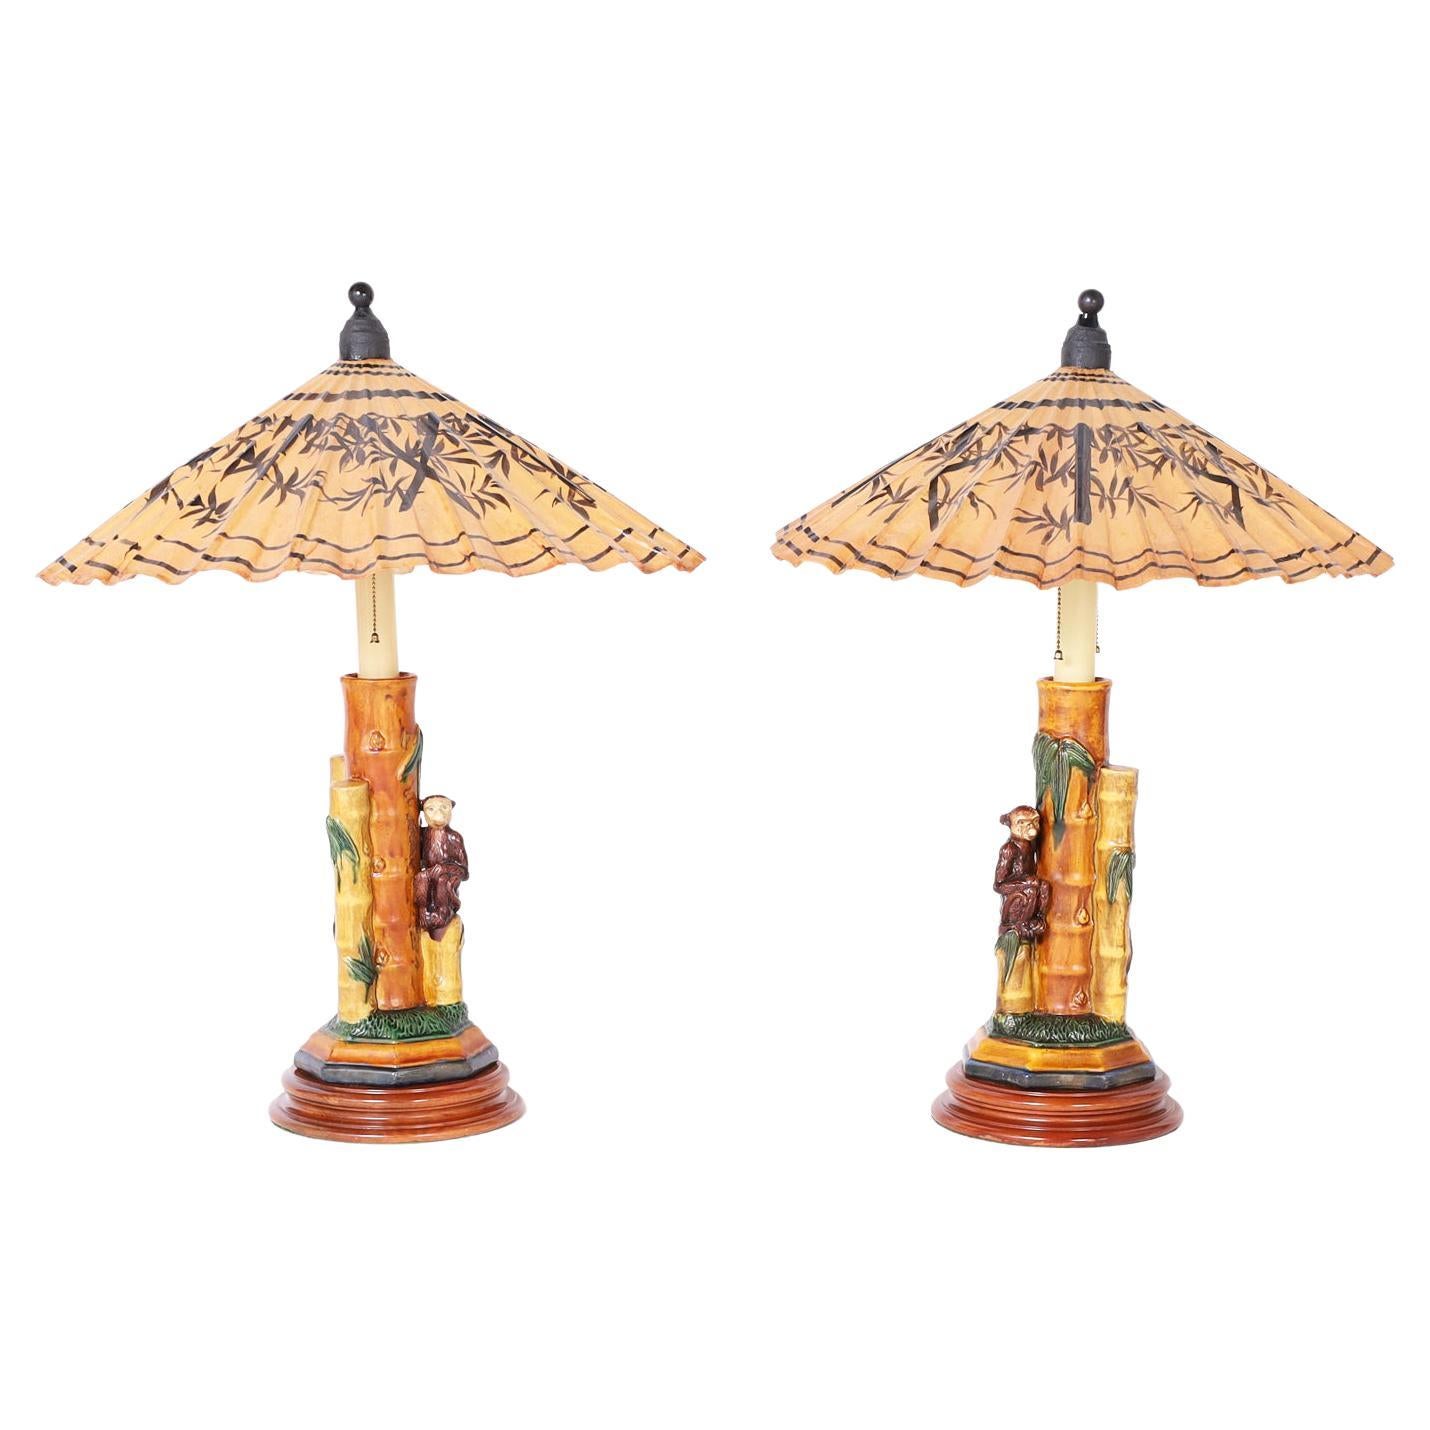 Pair of Porcelain Table Lamps with Monkeys and Umbrella Shades